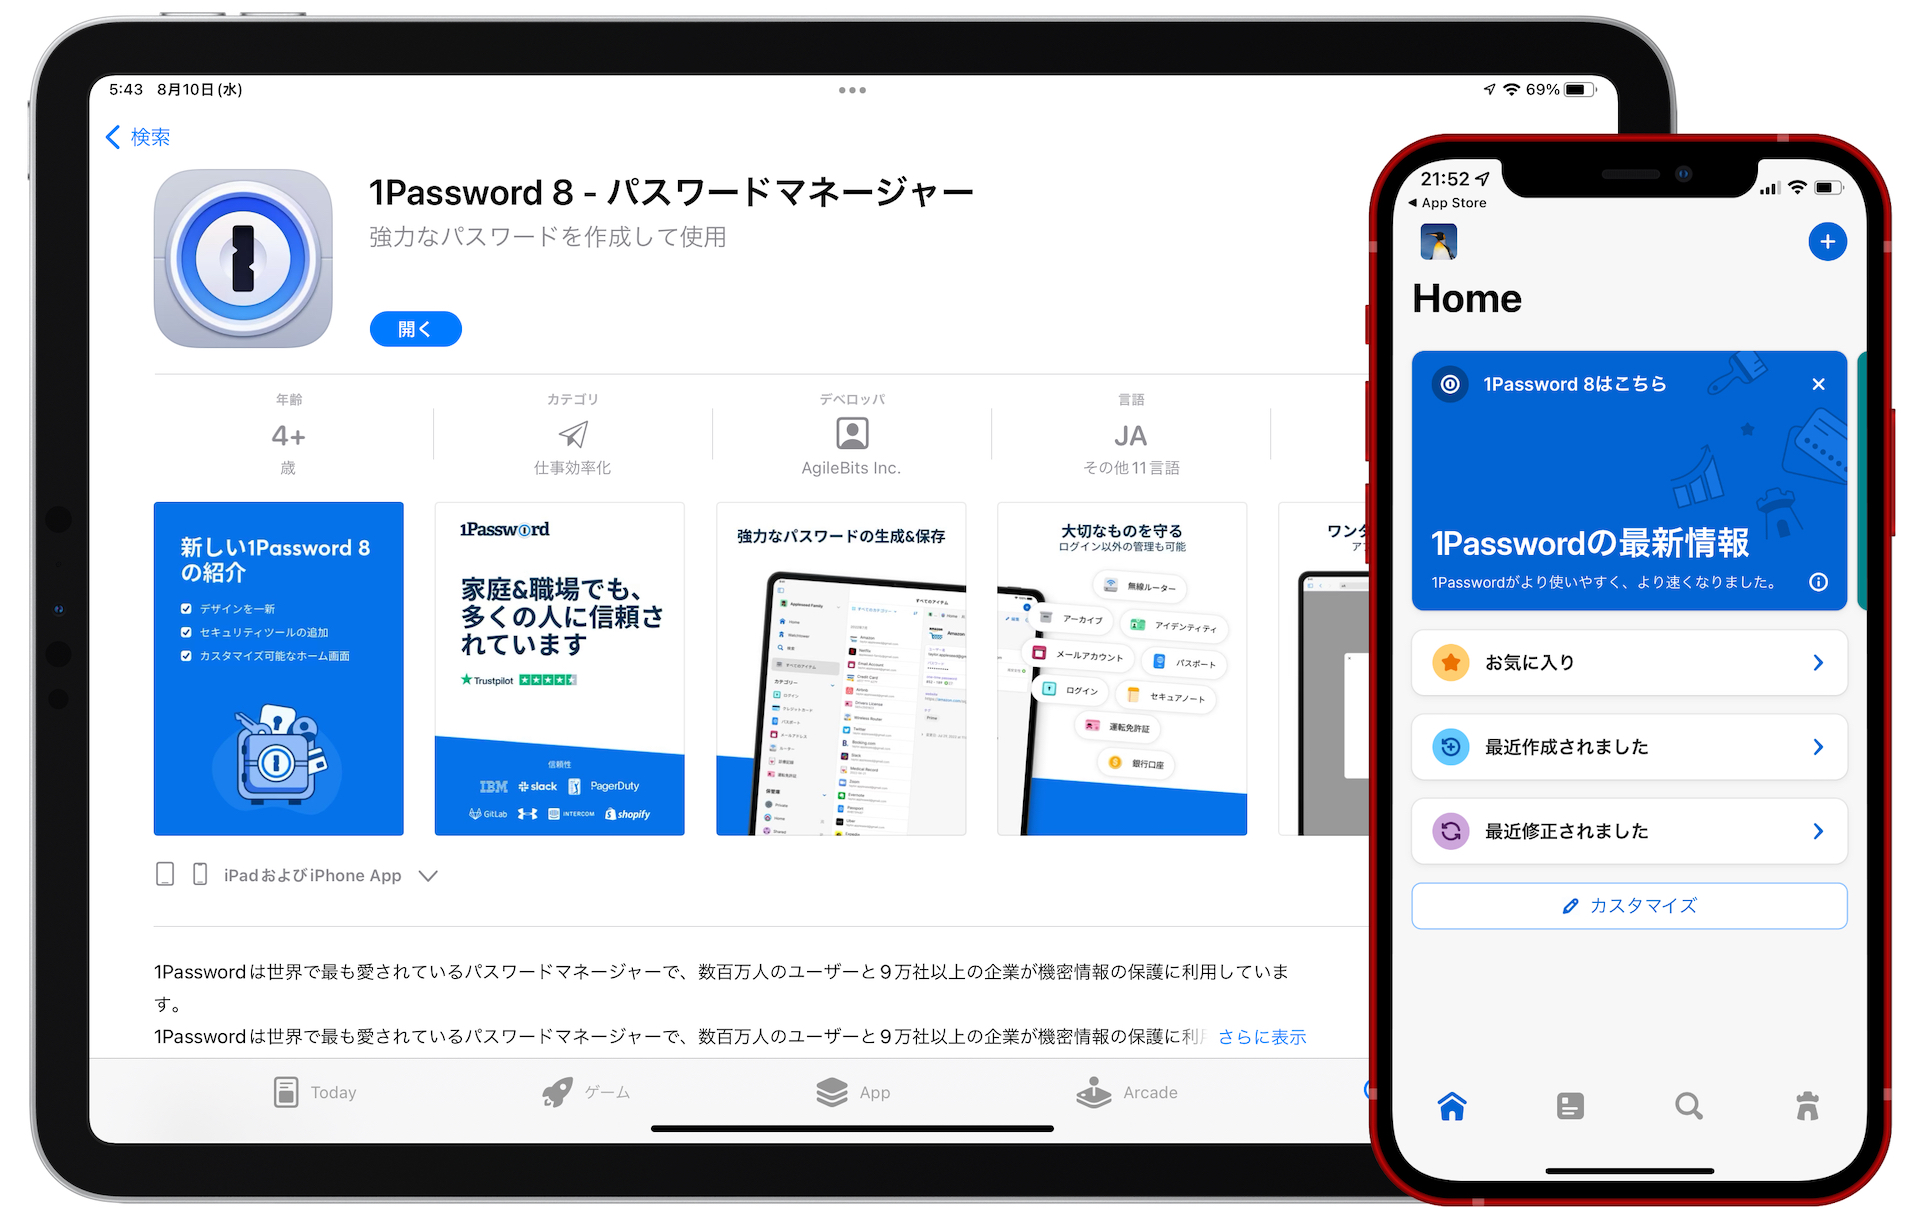 1Password 8 for iPhoneとiPad